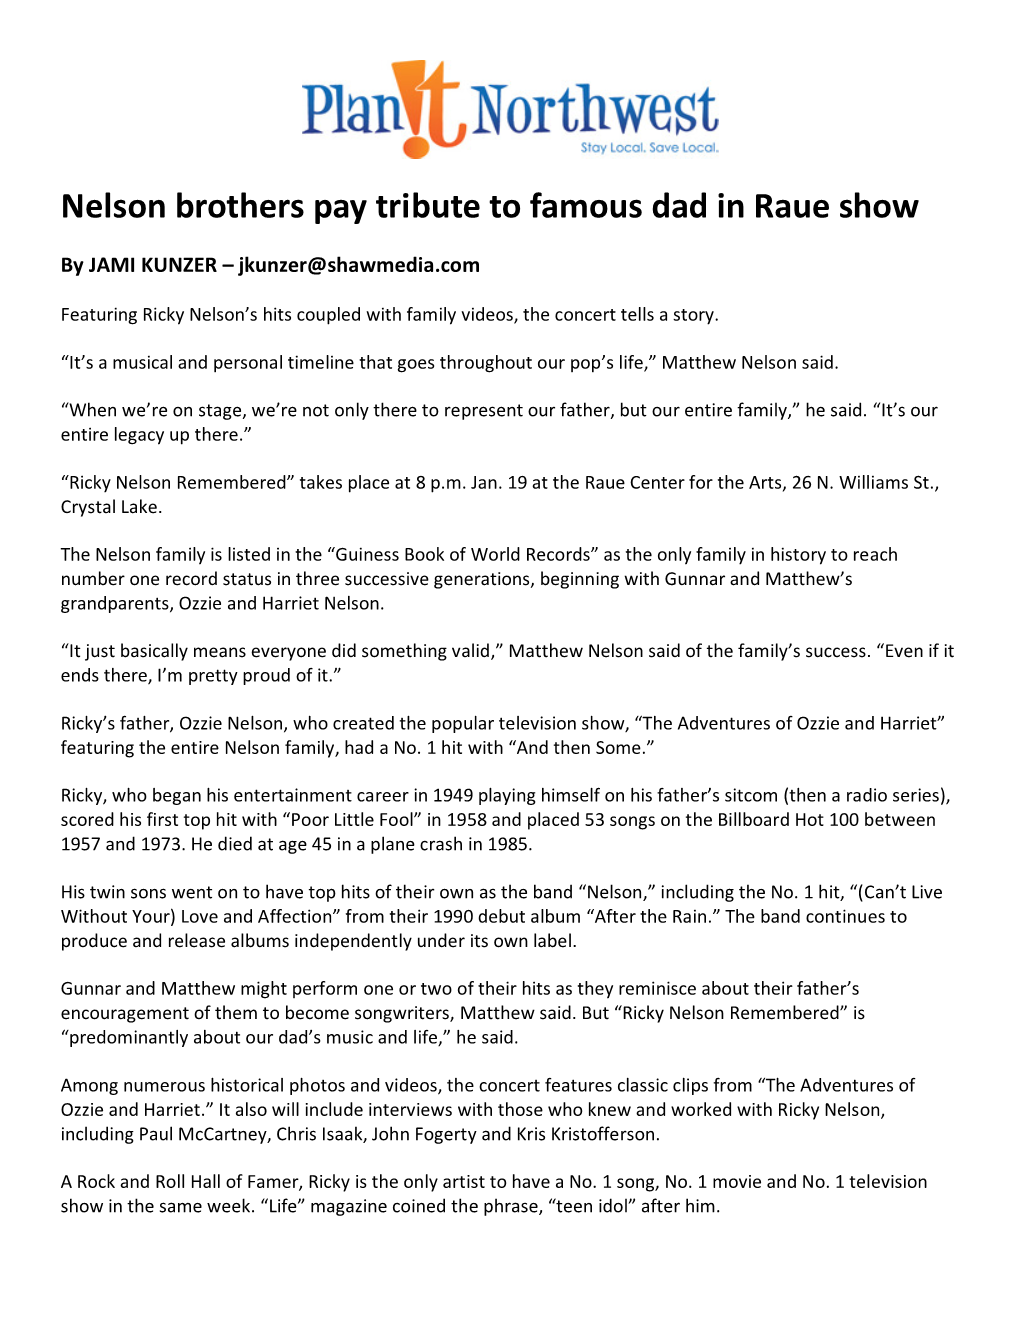 Nelson Brothers Pay Tribute to Famous Dad in Raue Show